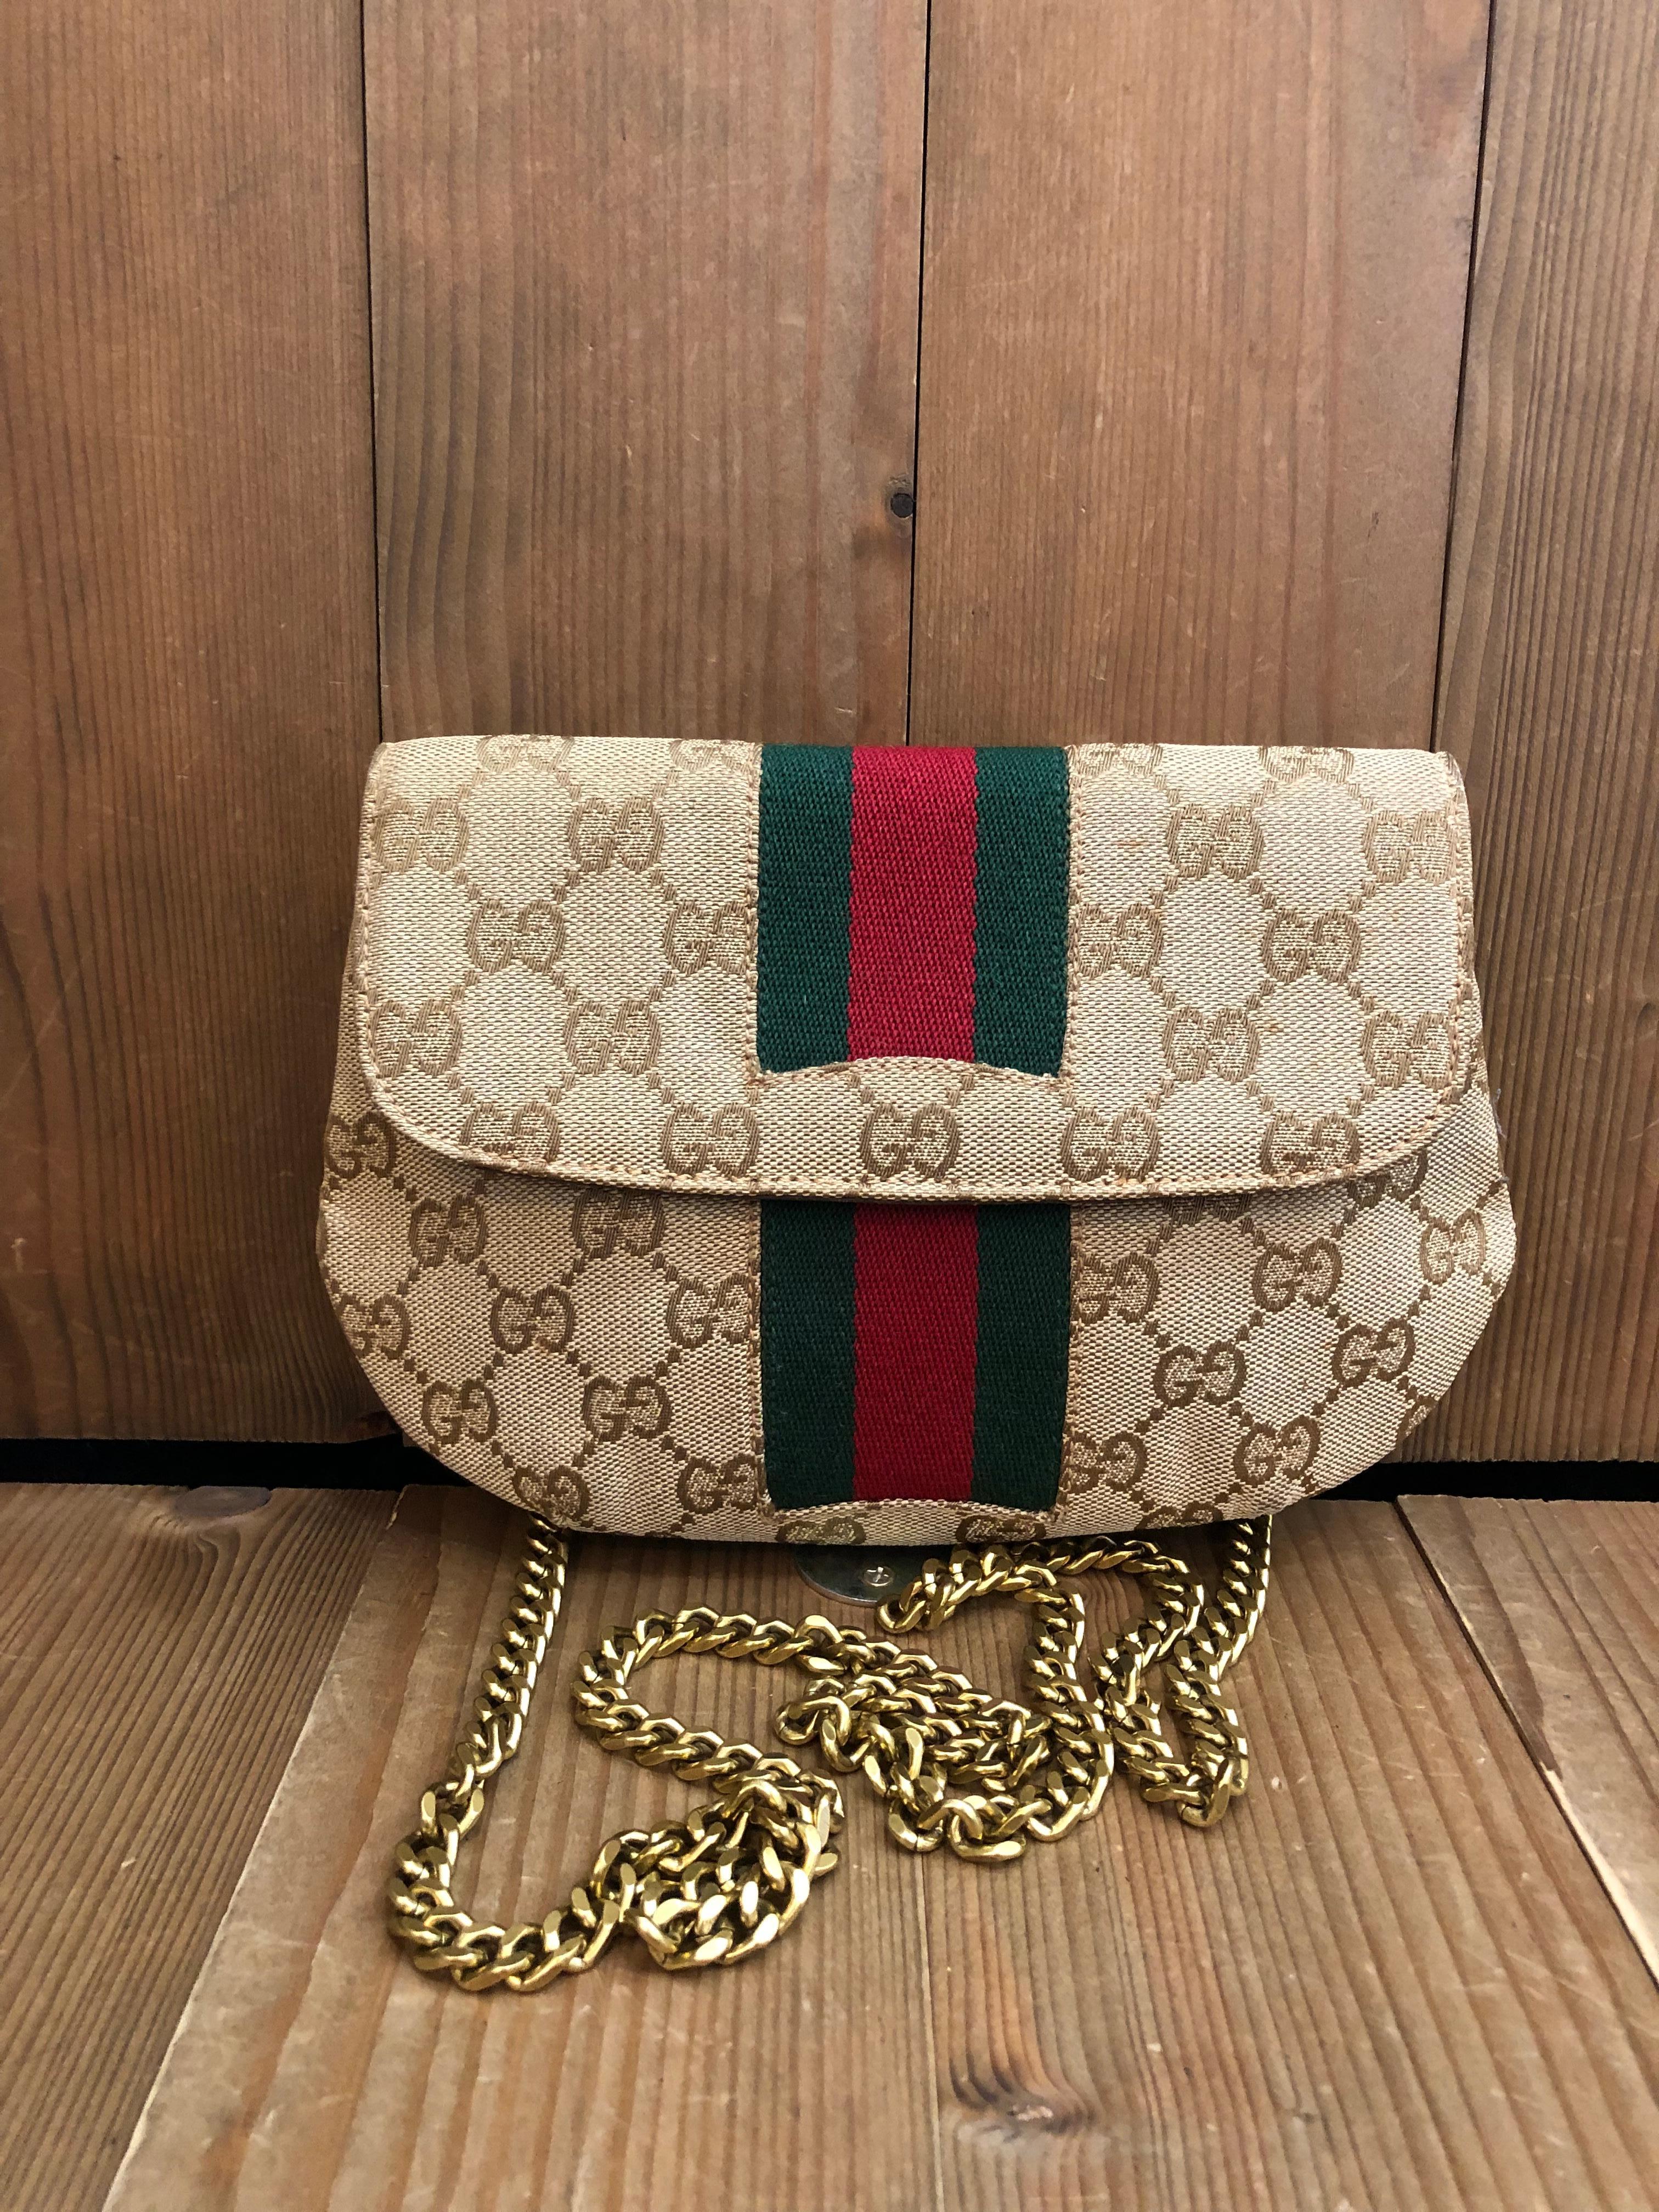 This vintage GUCCI pouch bag is crafted of GG monogram jacquard in brown featuring a green/red stripe. Front flap snap closure open to a nubuck leather interior. Made in Italy. Measures 7 x 6 x 1 inches. This pouch has been modified by adding third